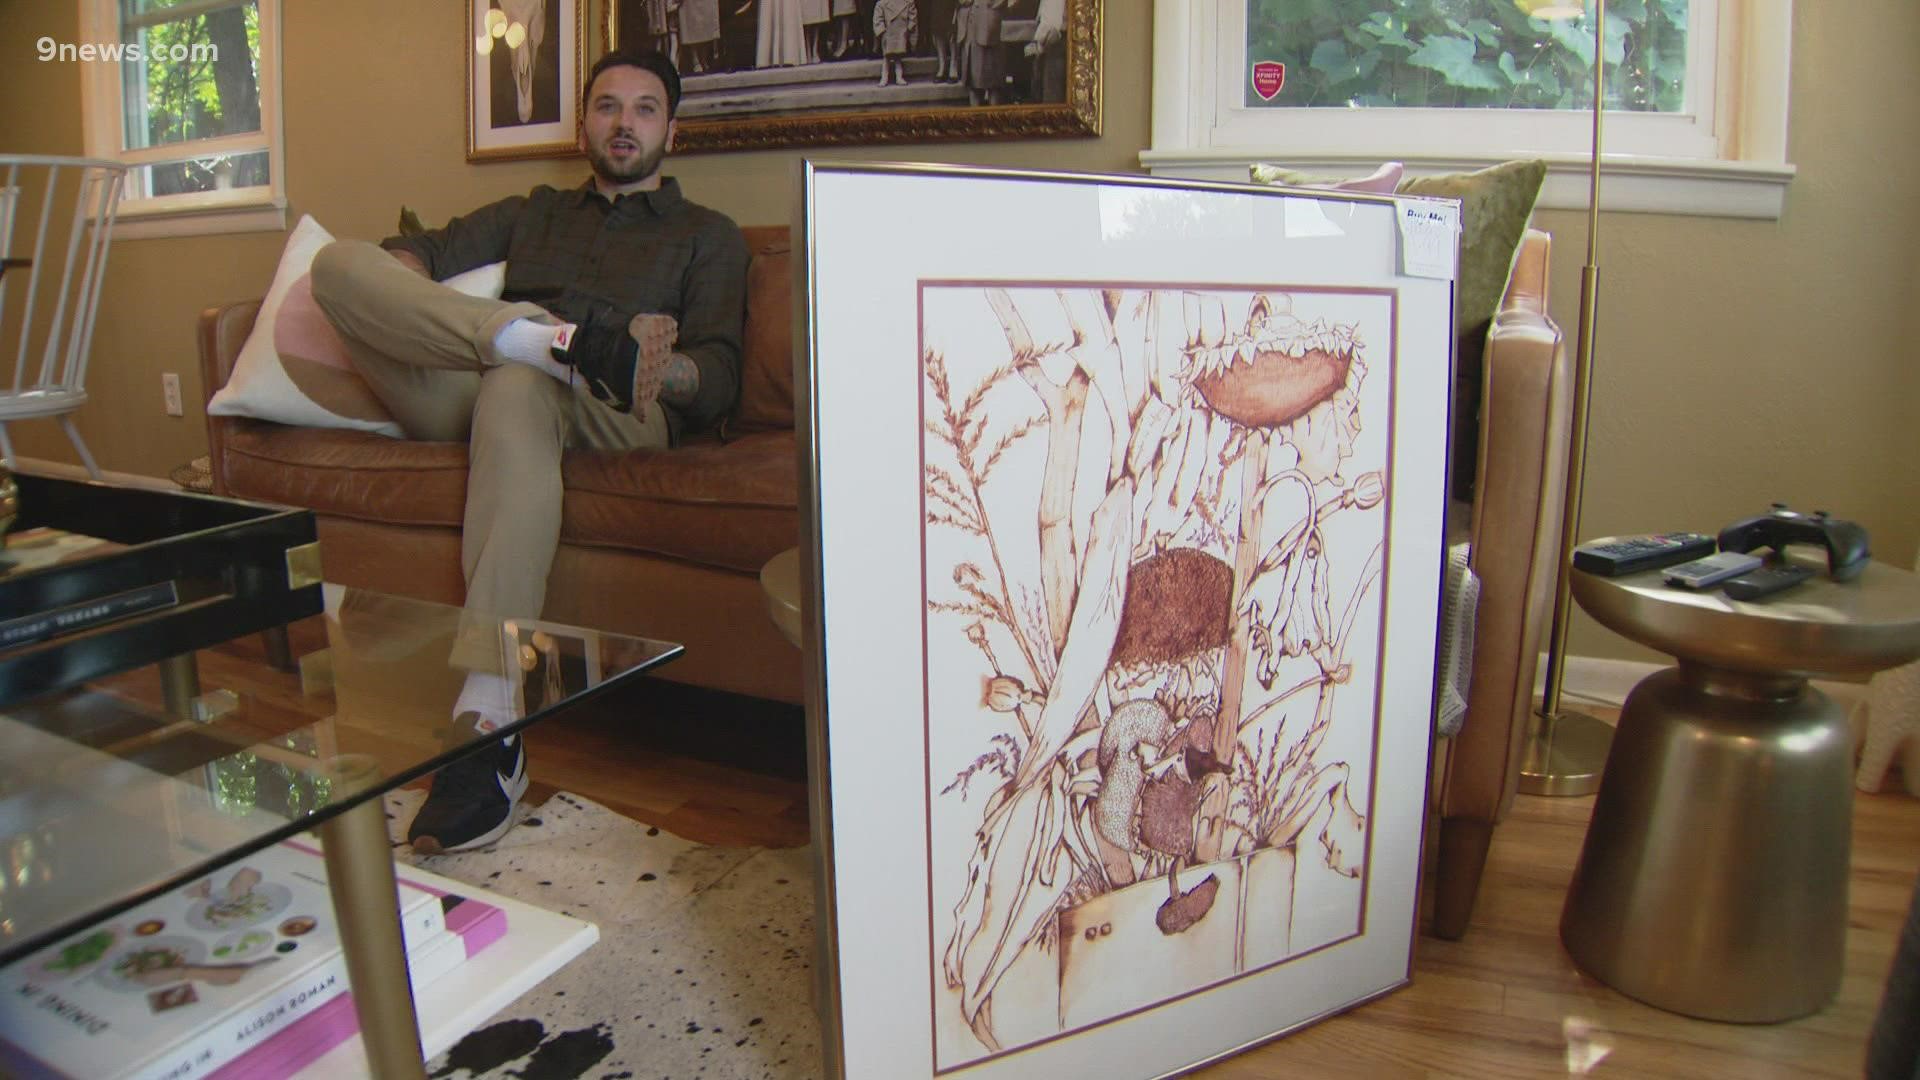 Jacob Hansen, in Denver, was at a local Goodwill when he spotted a painting he sold to a stranger when he was 14. He wants to sell it again, this time for charity.